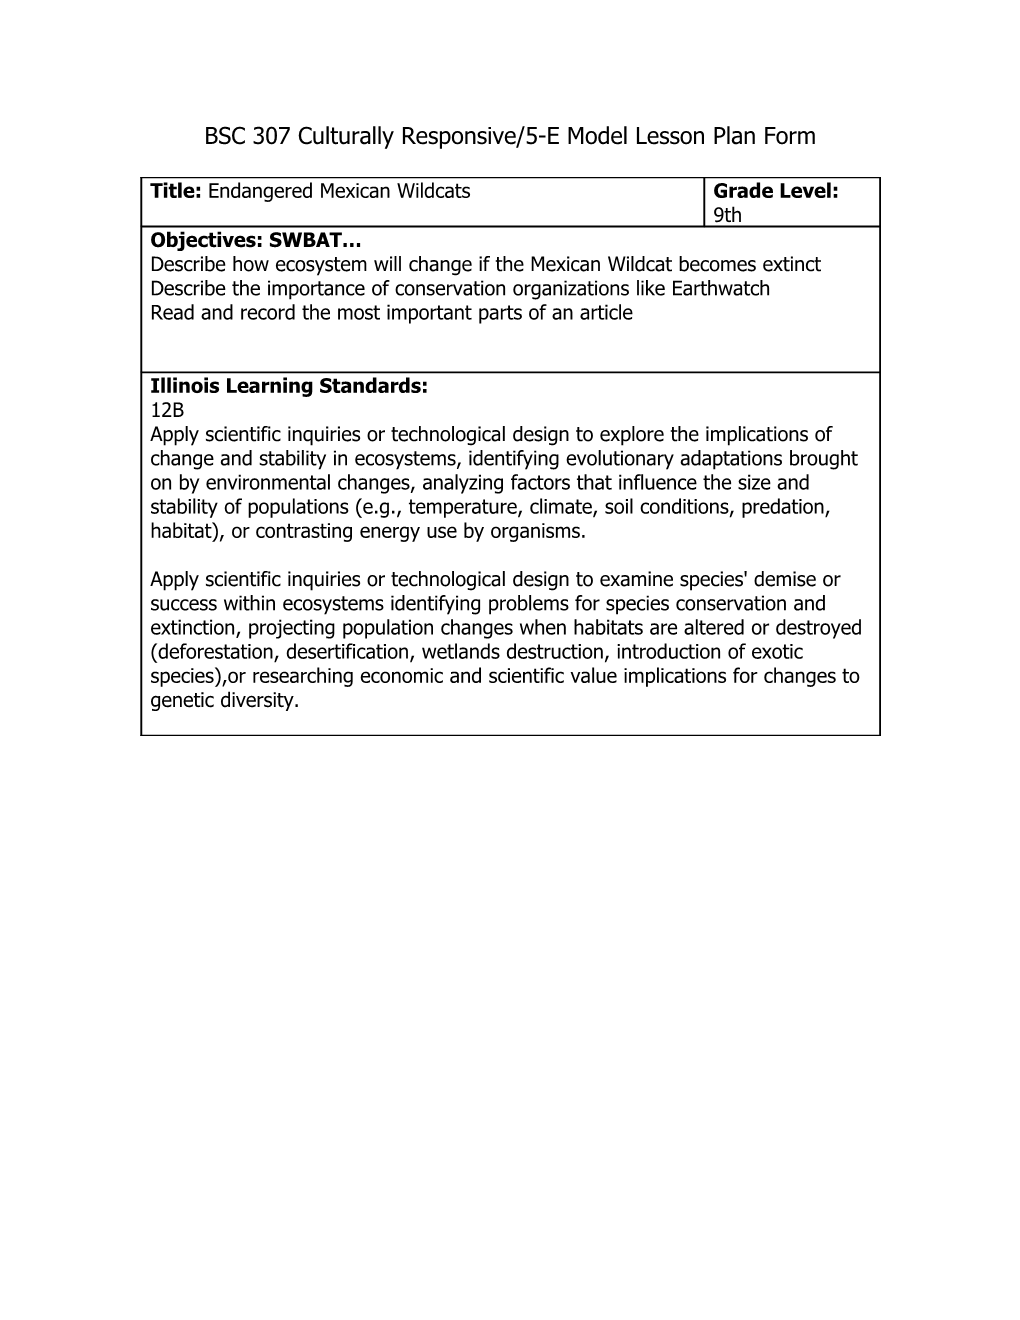 BSC 307 Culturally Responsive/5-E Model Lesson Plan Form